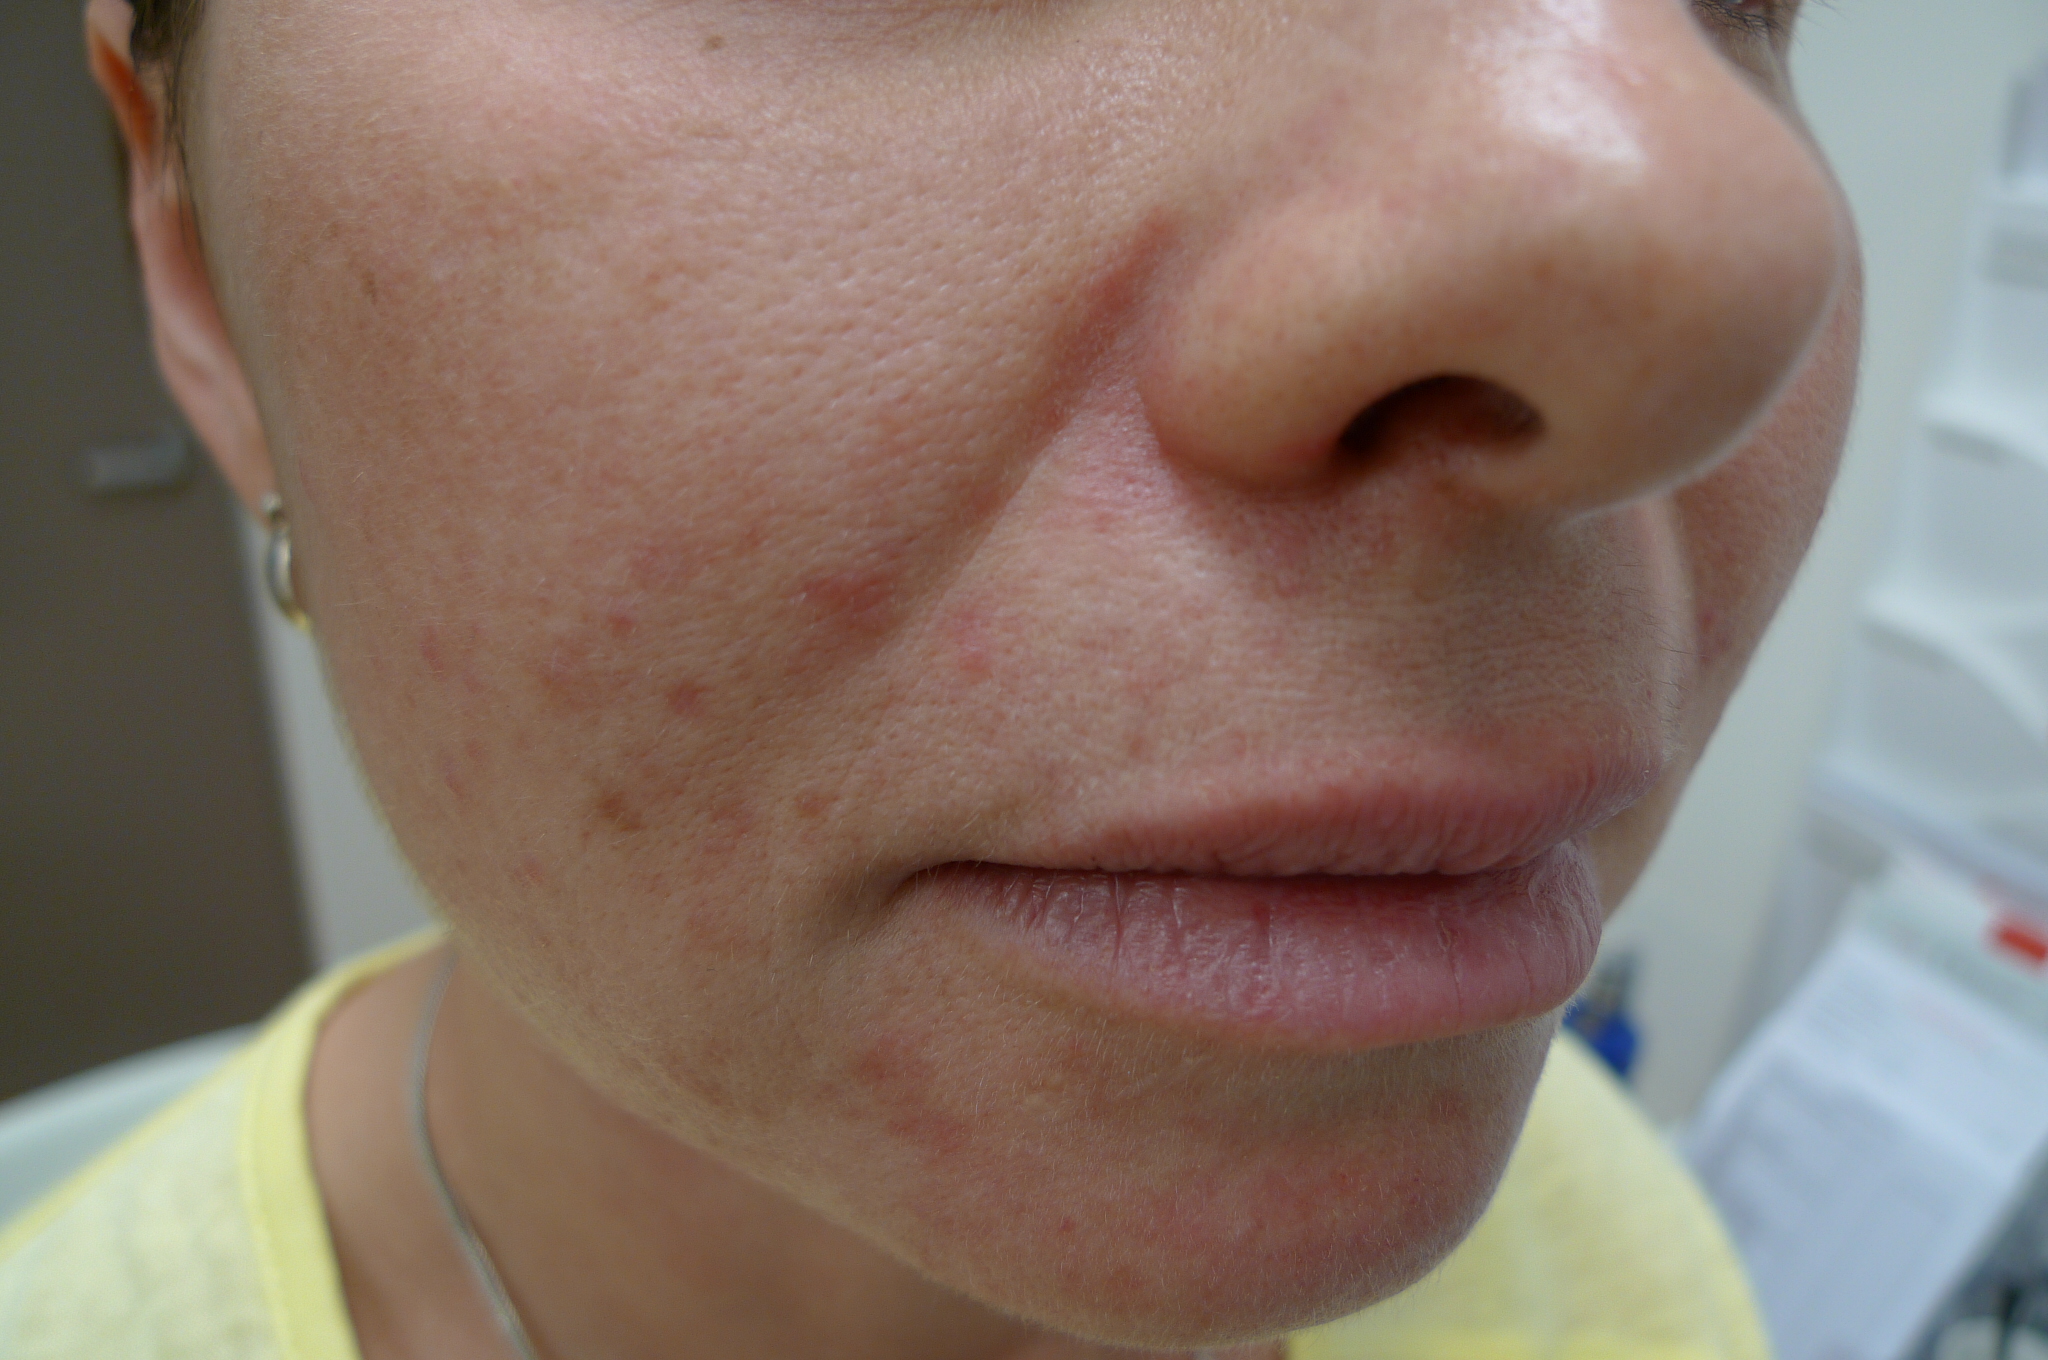 Perioral dermatitis Image reproduced with permission of Dr Davin Lim